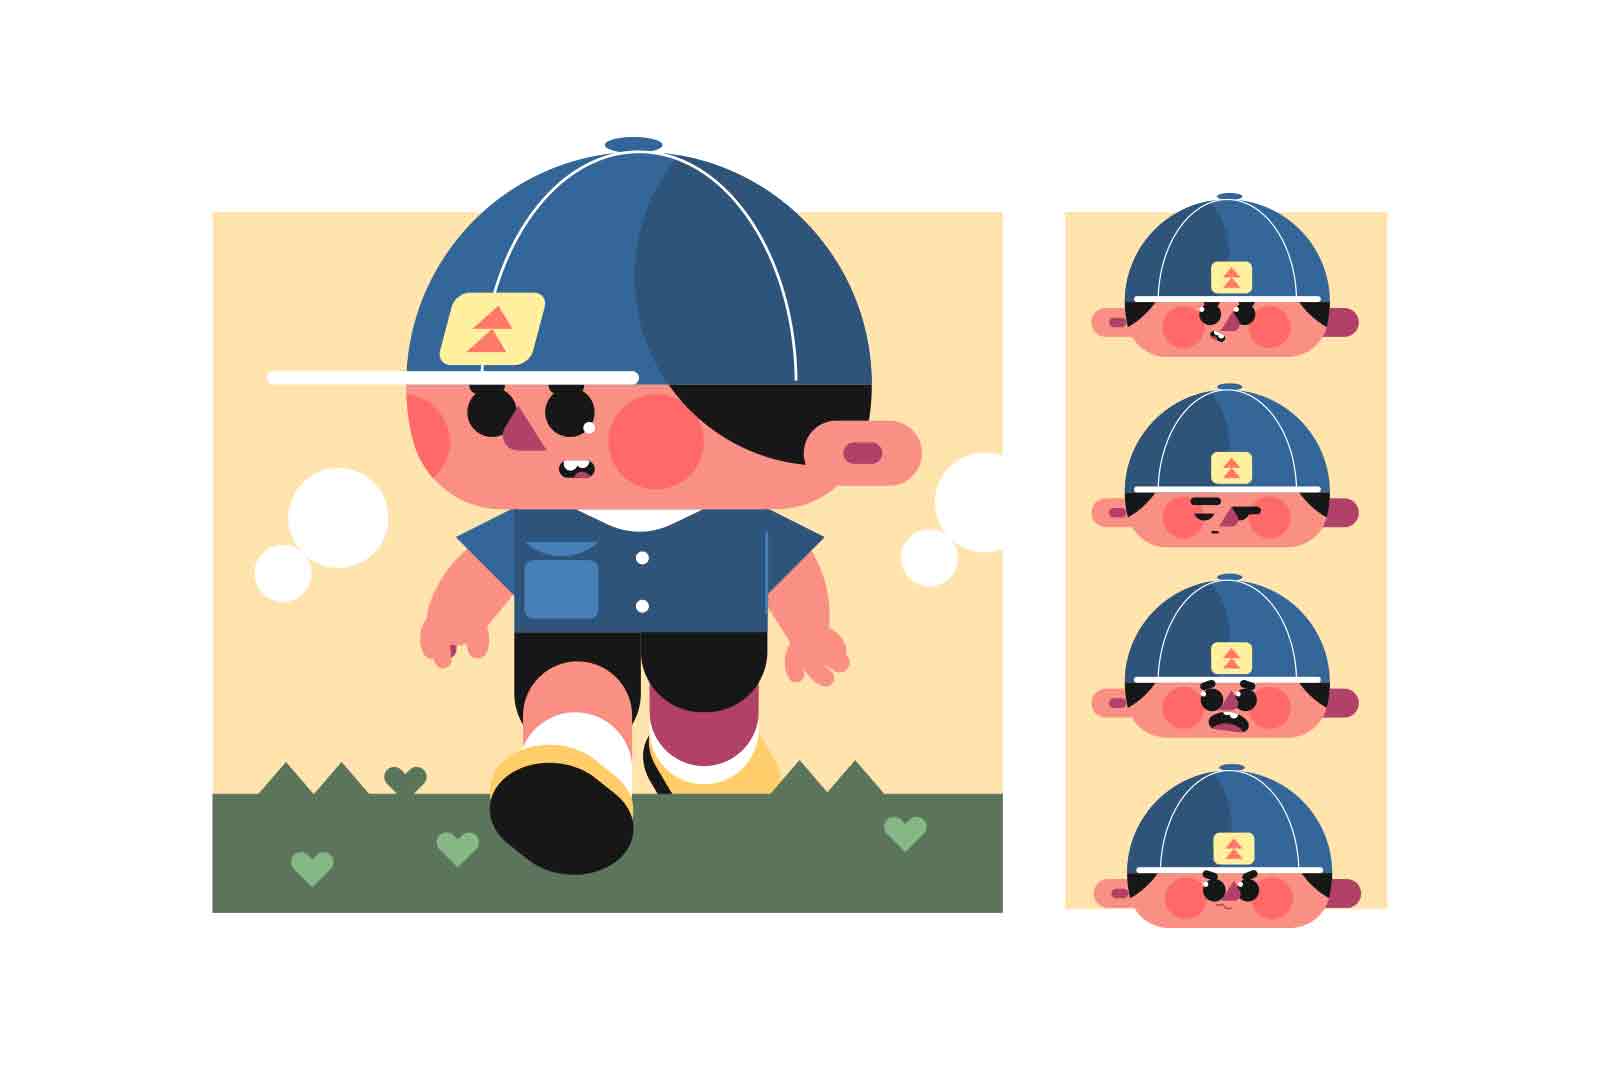 Boy walking on grassy field, Vector illustration of cartoon character with pink face and blue baseball cap.